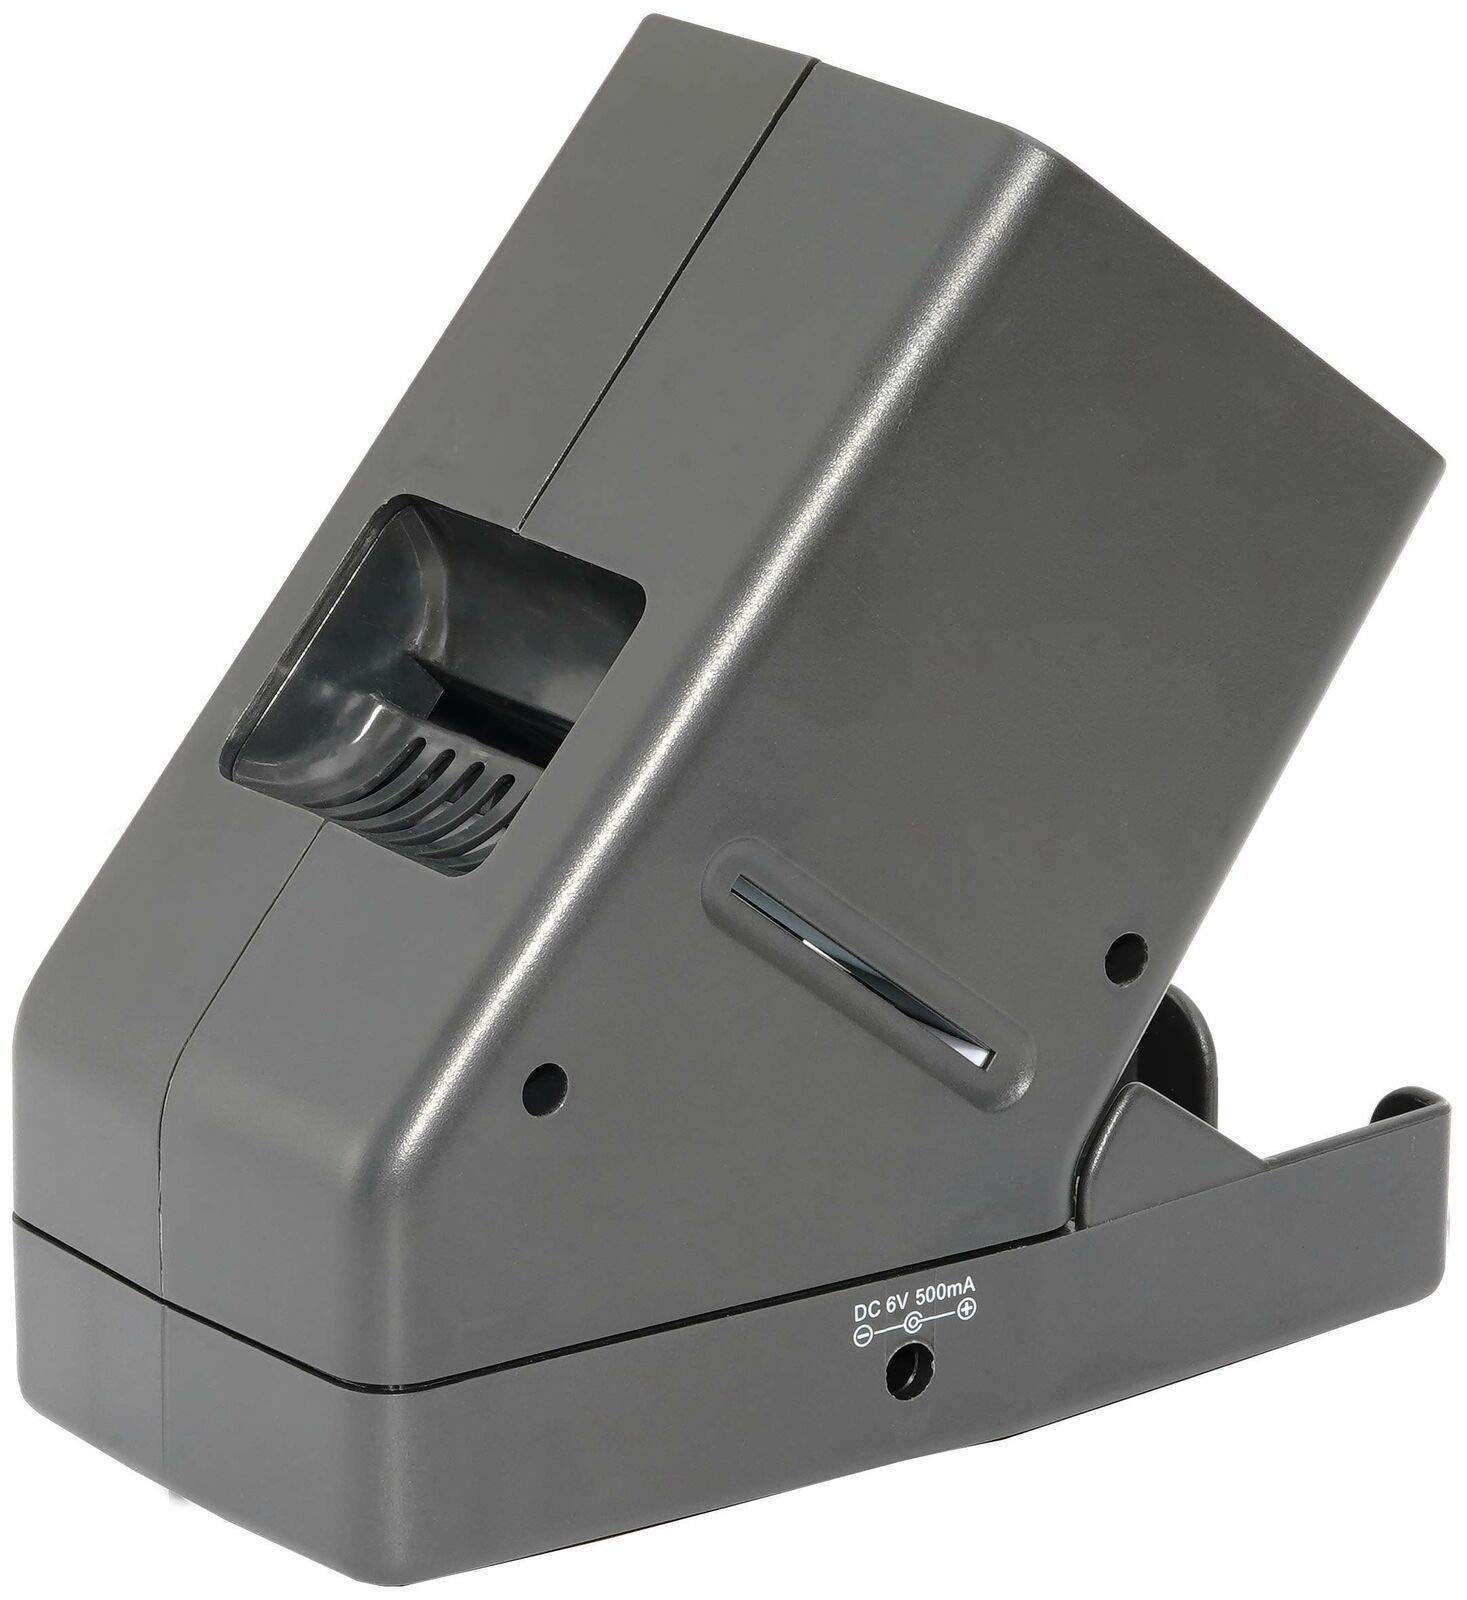 Porta Slide PS-3 Slide Viewer, View 2x2 in. Slides, 35mm Film Strips & Negatives, LED Viewing light, 4 in. Screen, 3x Magnification w/Cleaning Cloth, USB Power Cable included